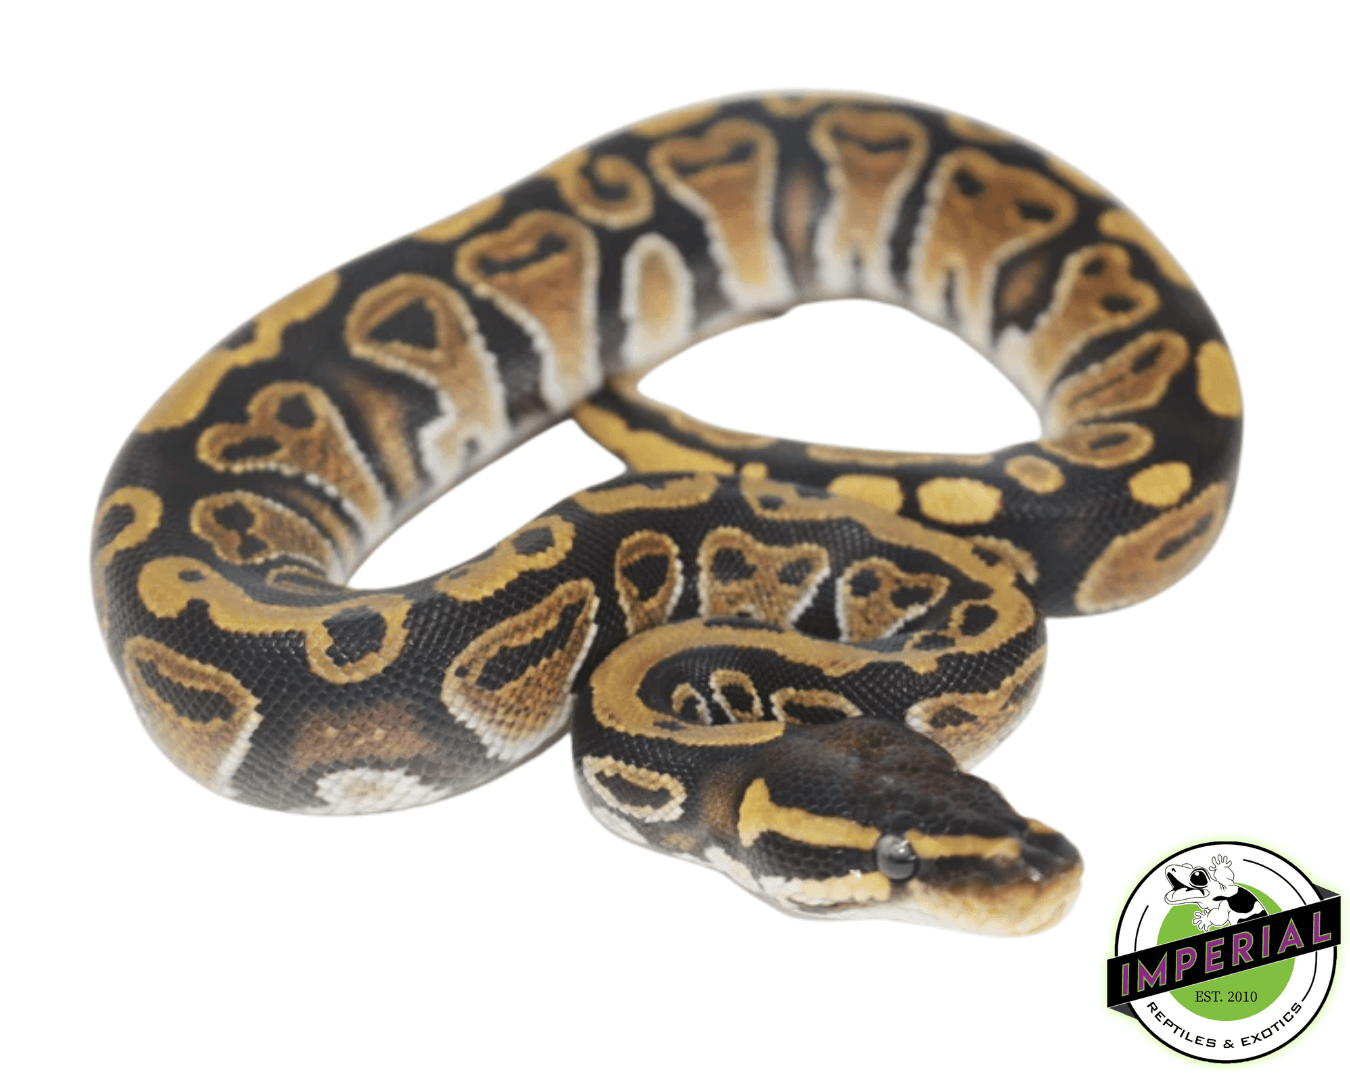 ball python for sale, buy reptiles online